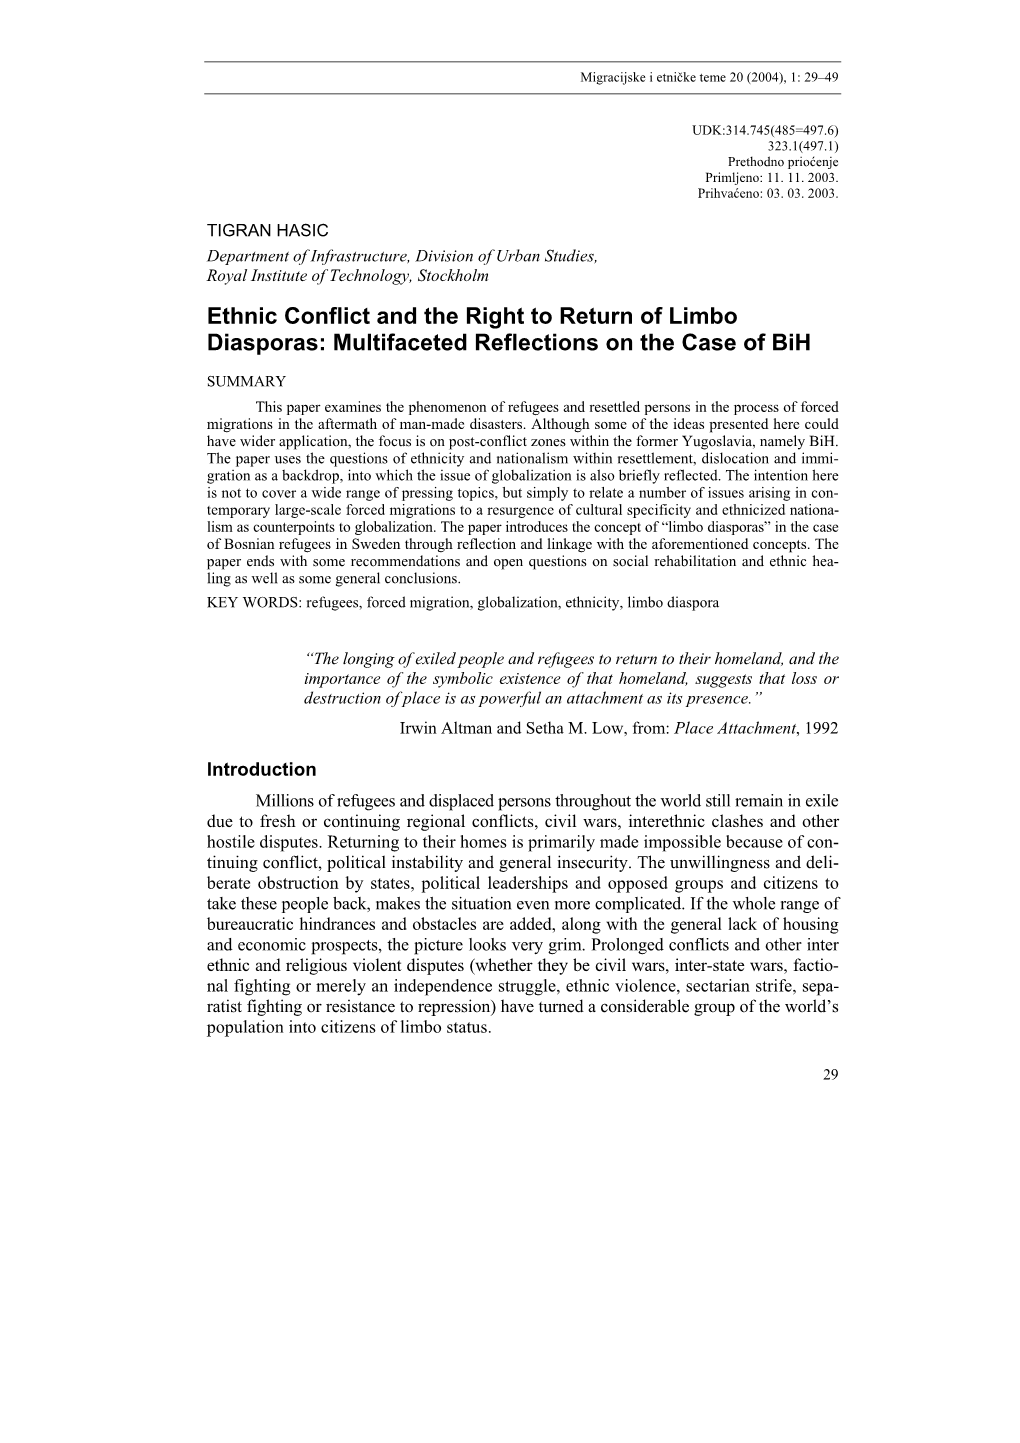 Ethnic Conflict and the Right to Return of Limbo Diasporas: Multifaceted Reflections on the Case of Bih